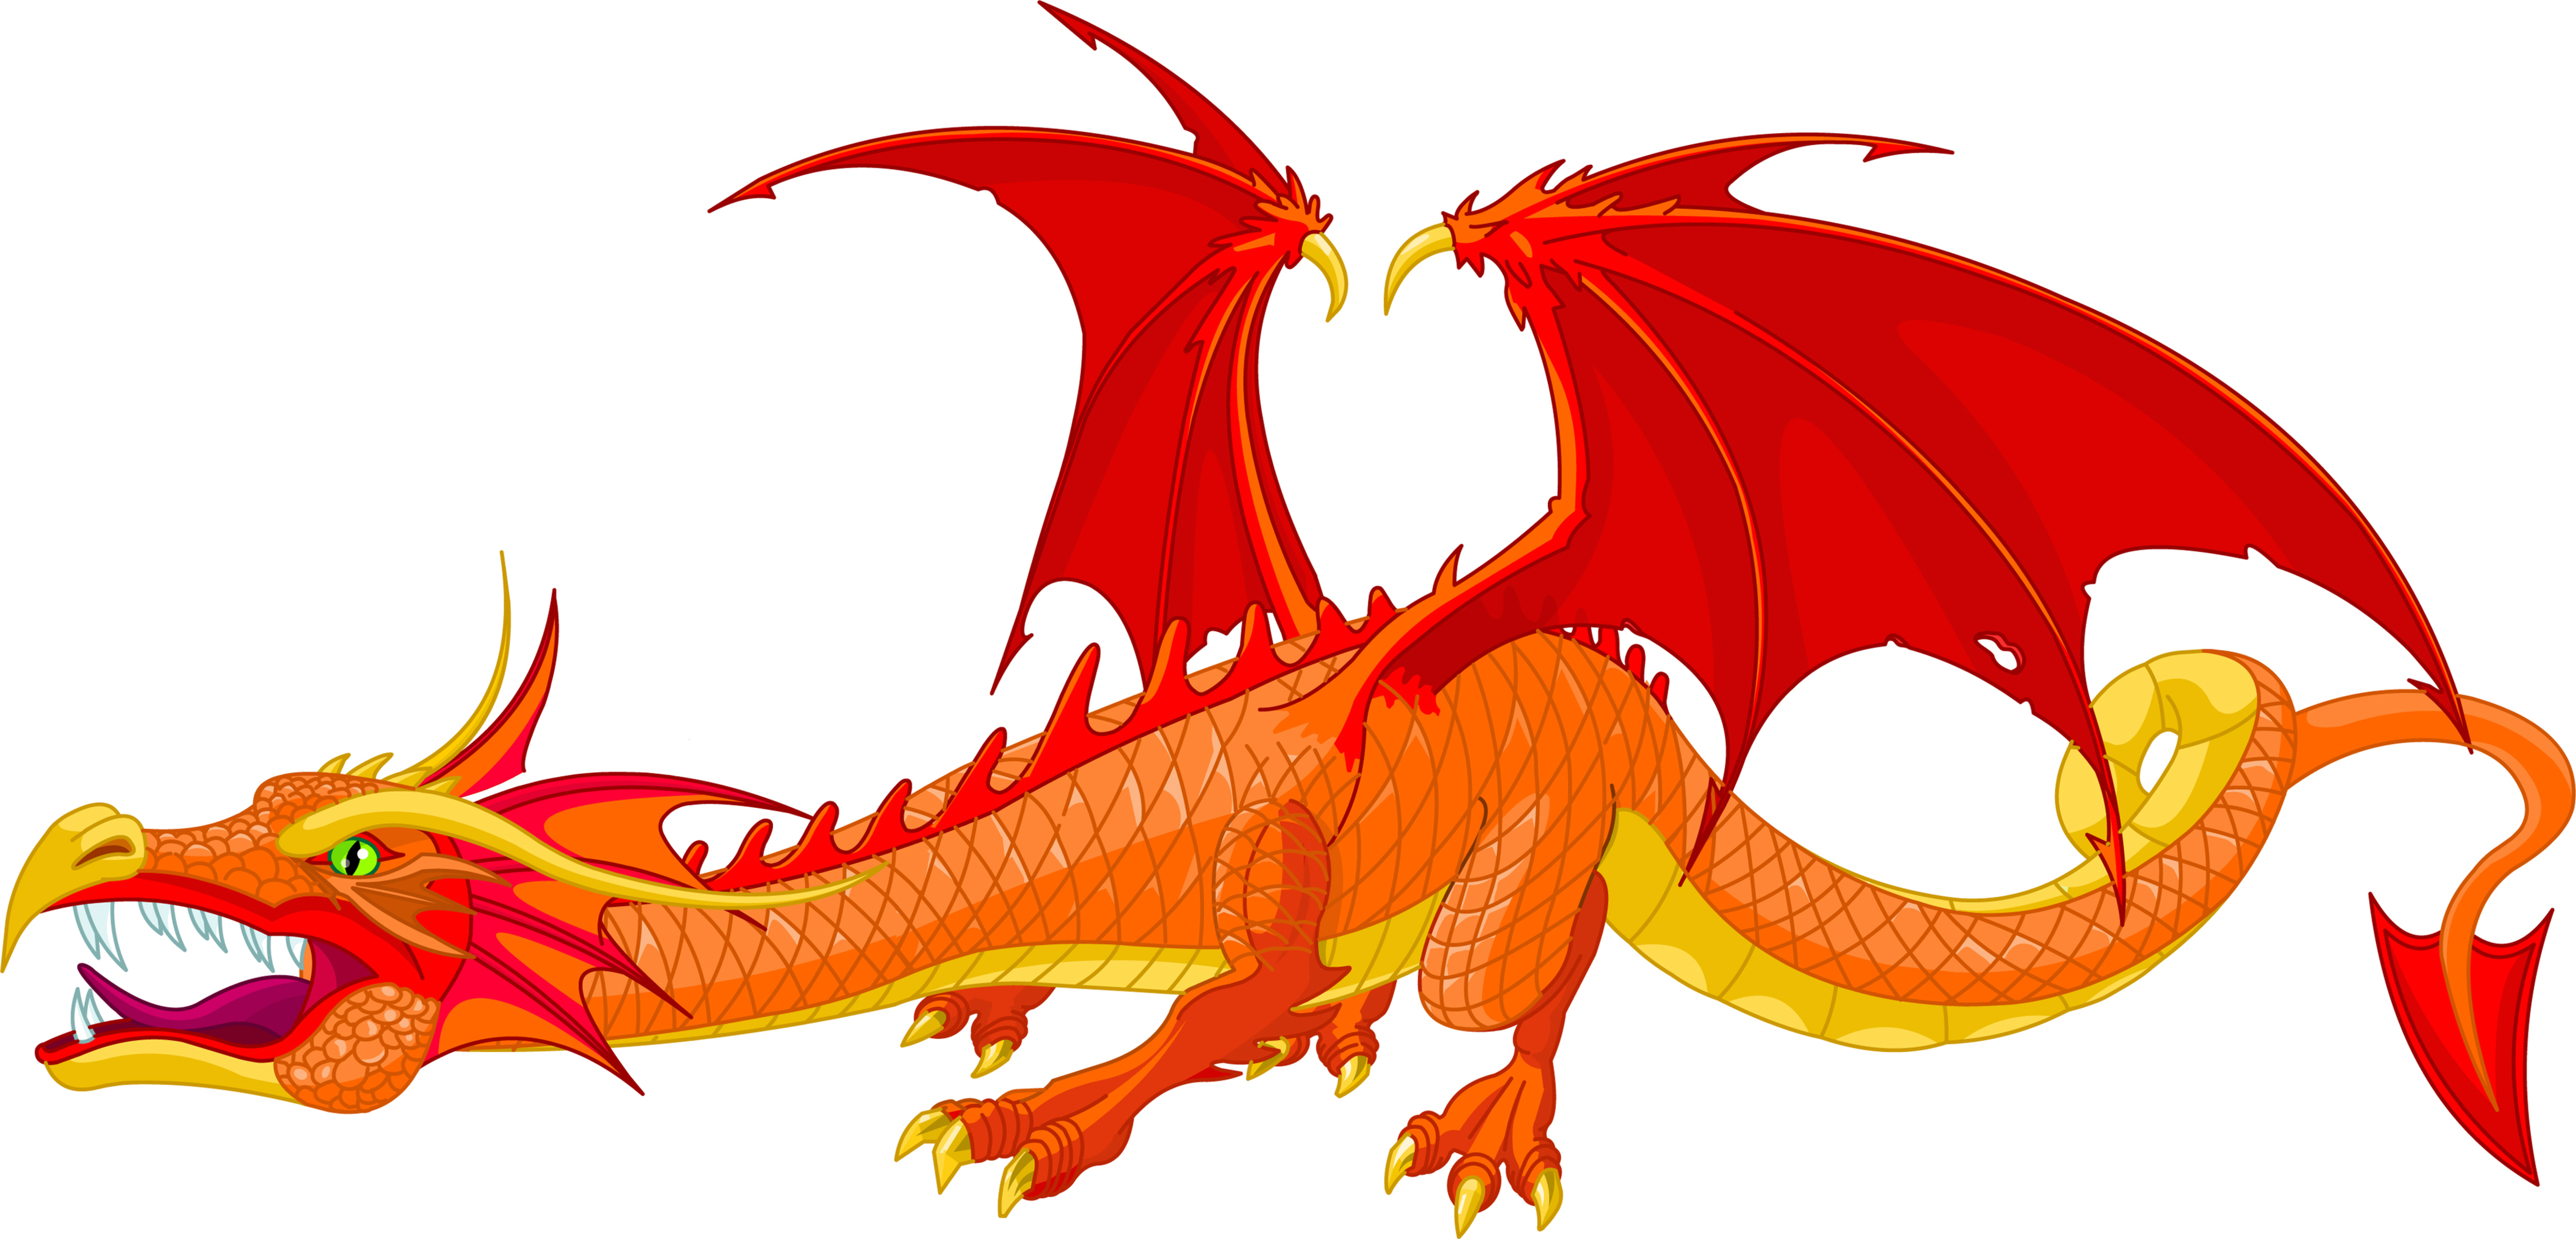 Scary dragon clipart.